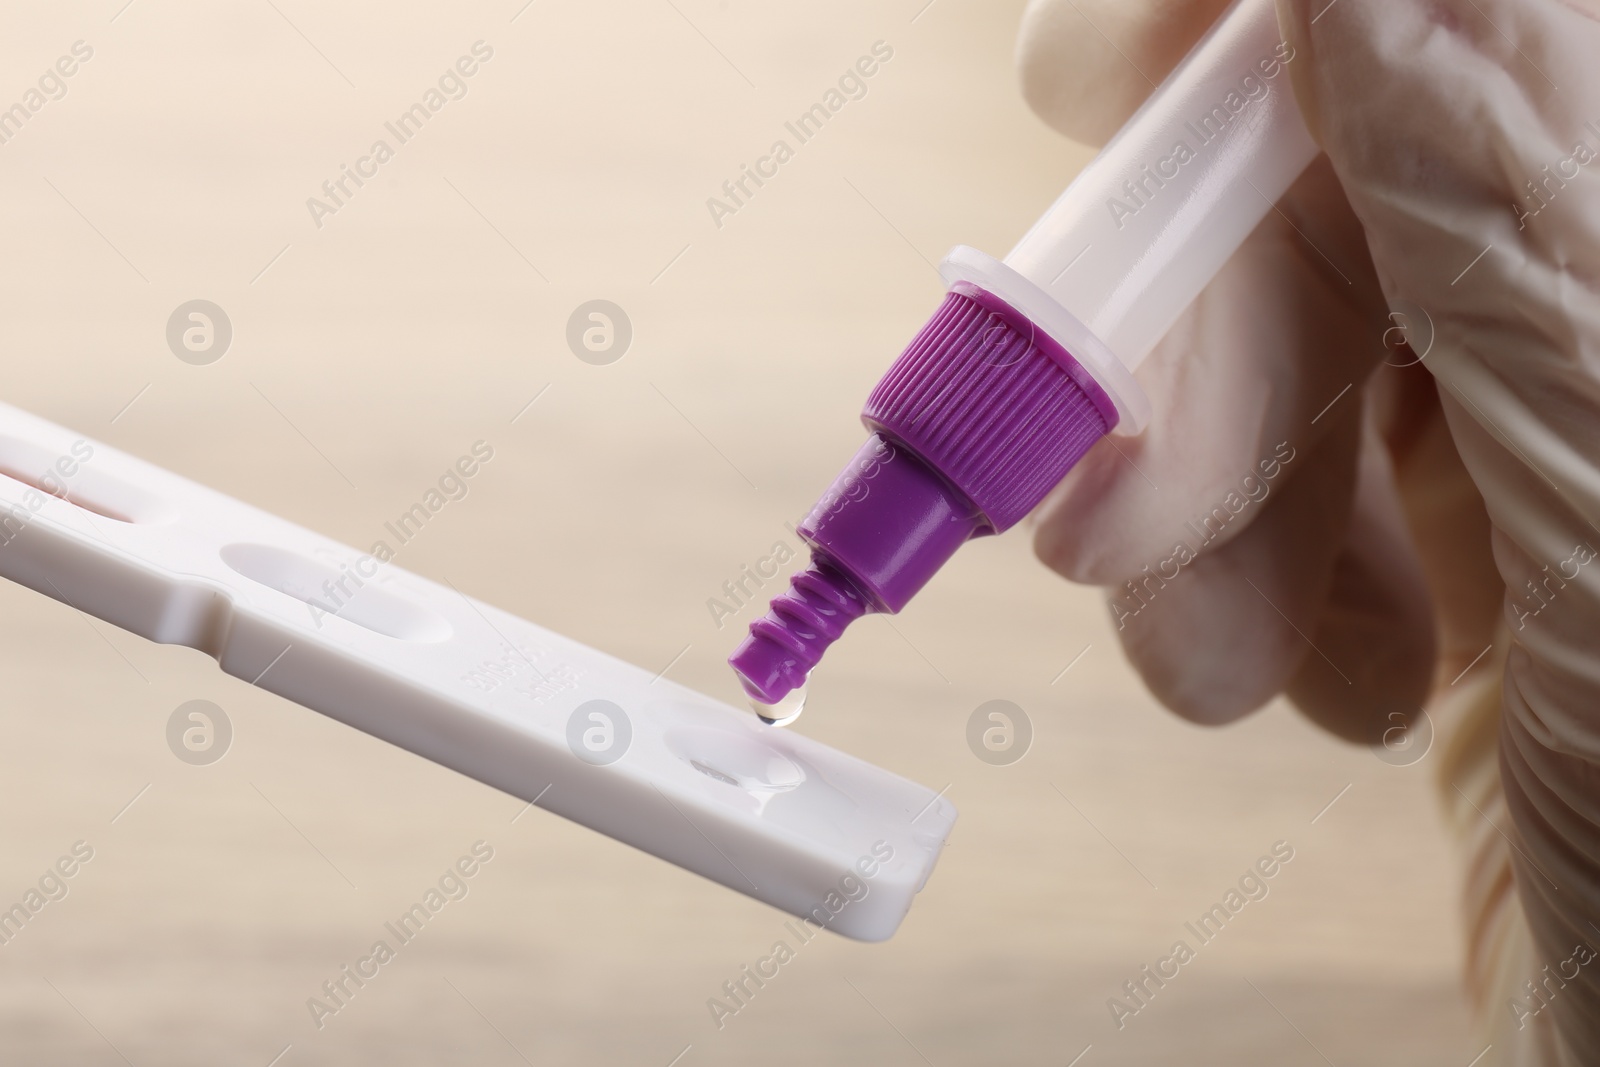 Photo of Doctor dropping buffer solution onto disposable express test cassette against blurred background, closeup